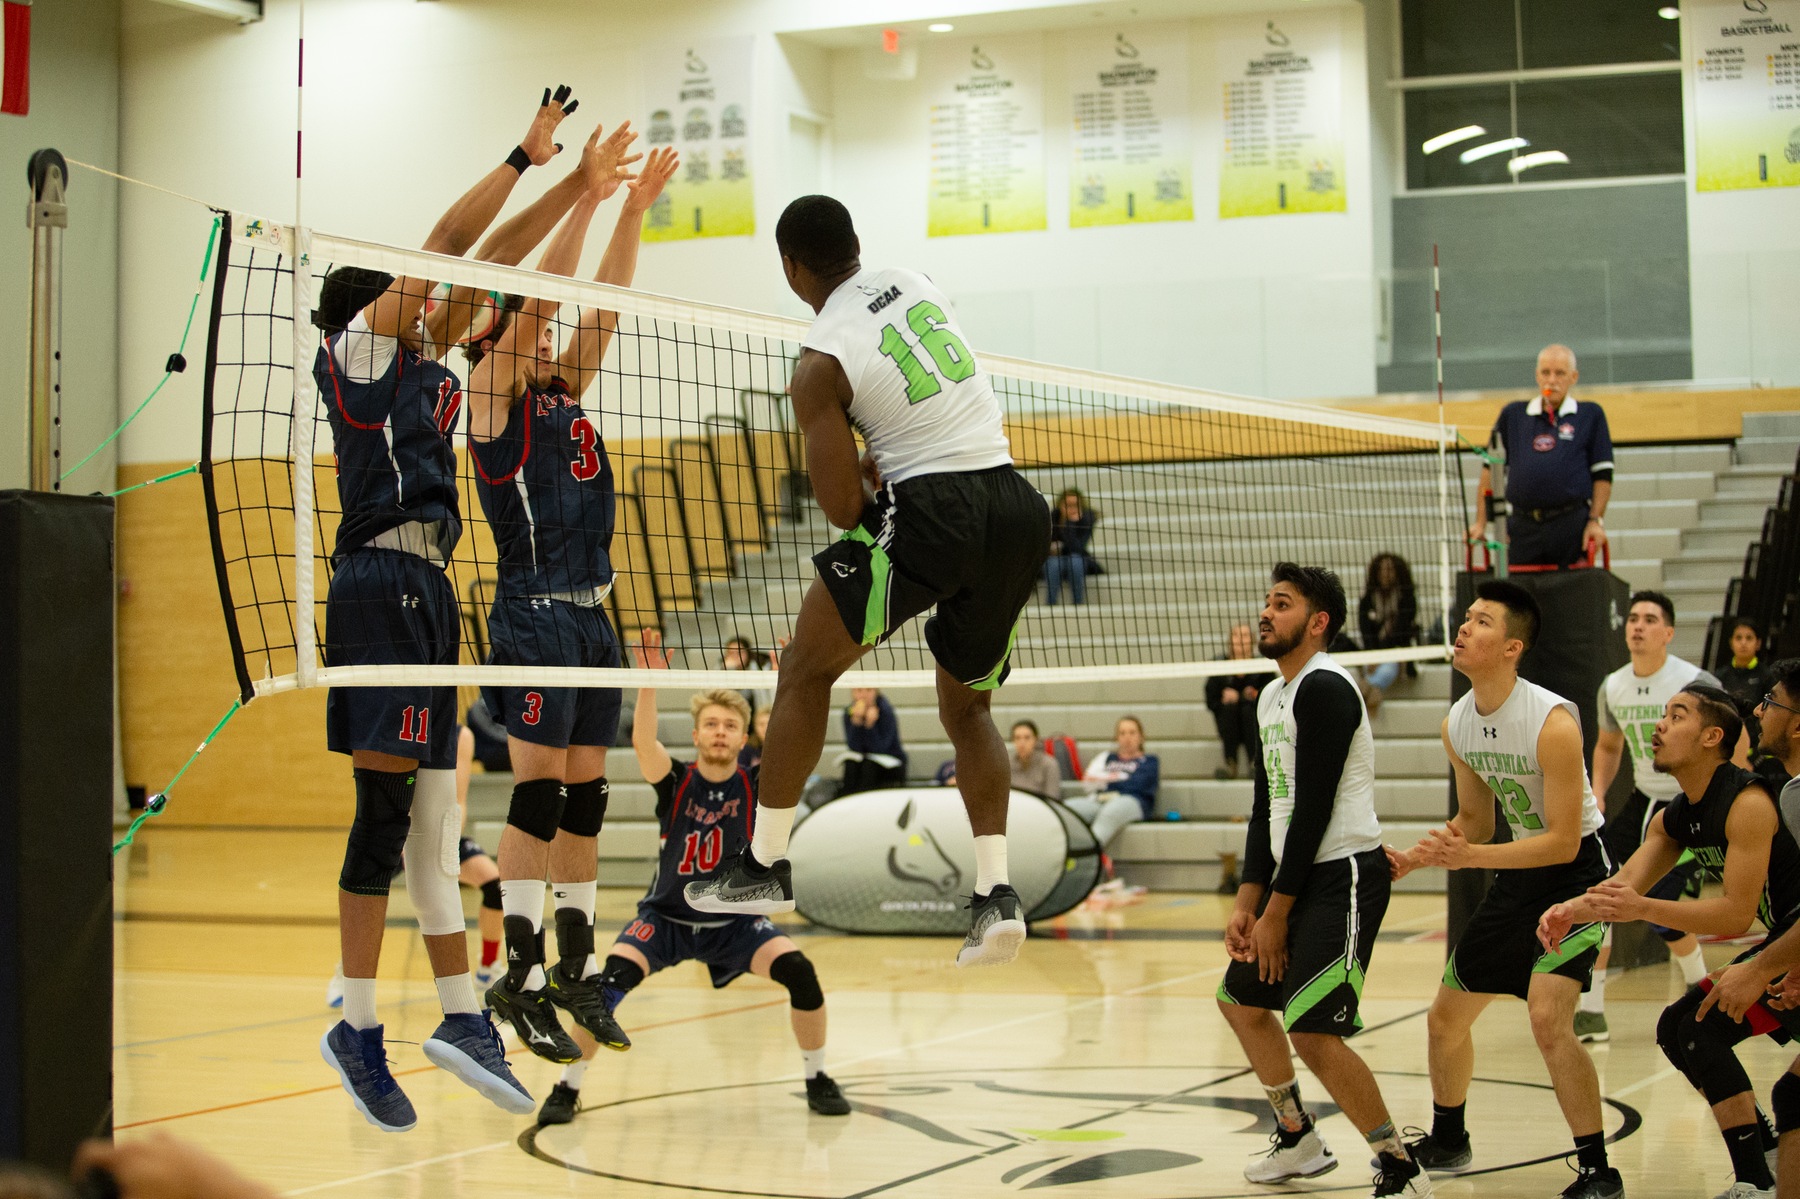 Marvin Reid of the Centennial Colts goes up for the kill against the Loyalist Lancers at the Athletic and Wellness Centre. (Nicole Ventura/Colts Media)